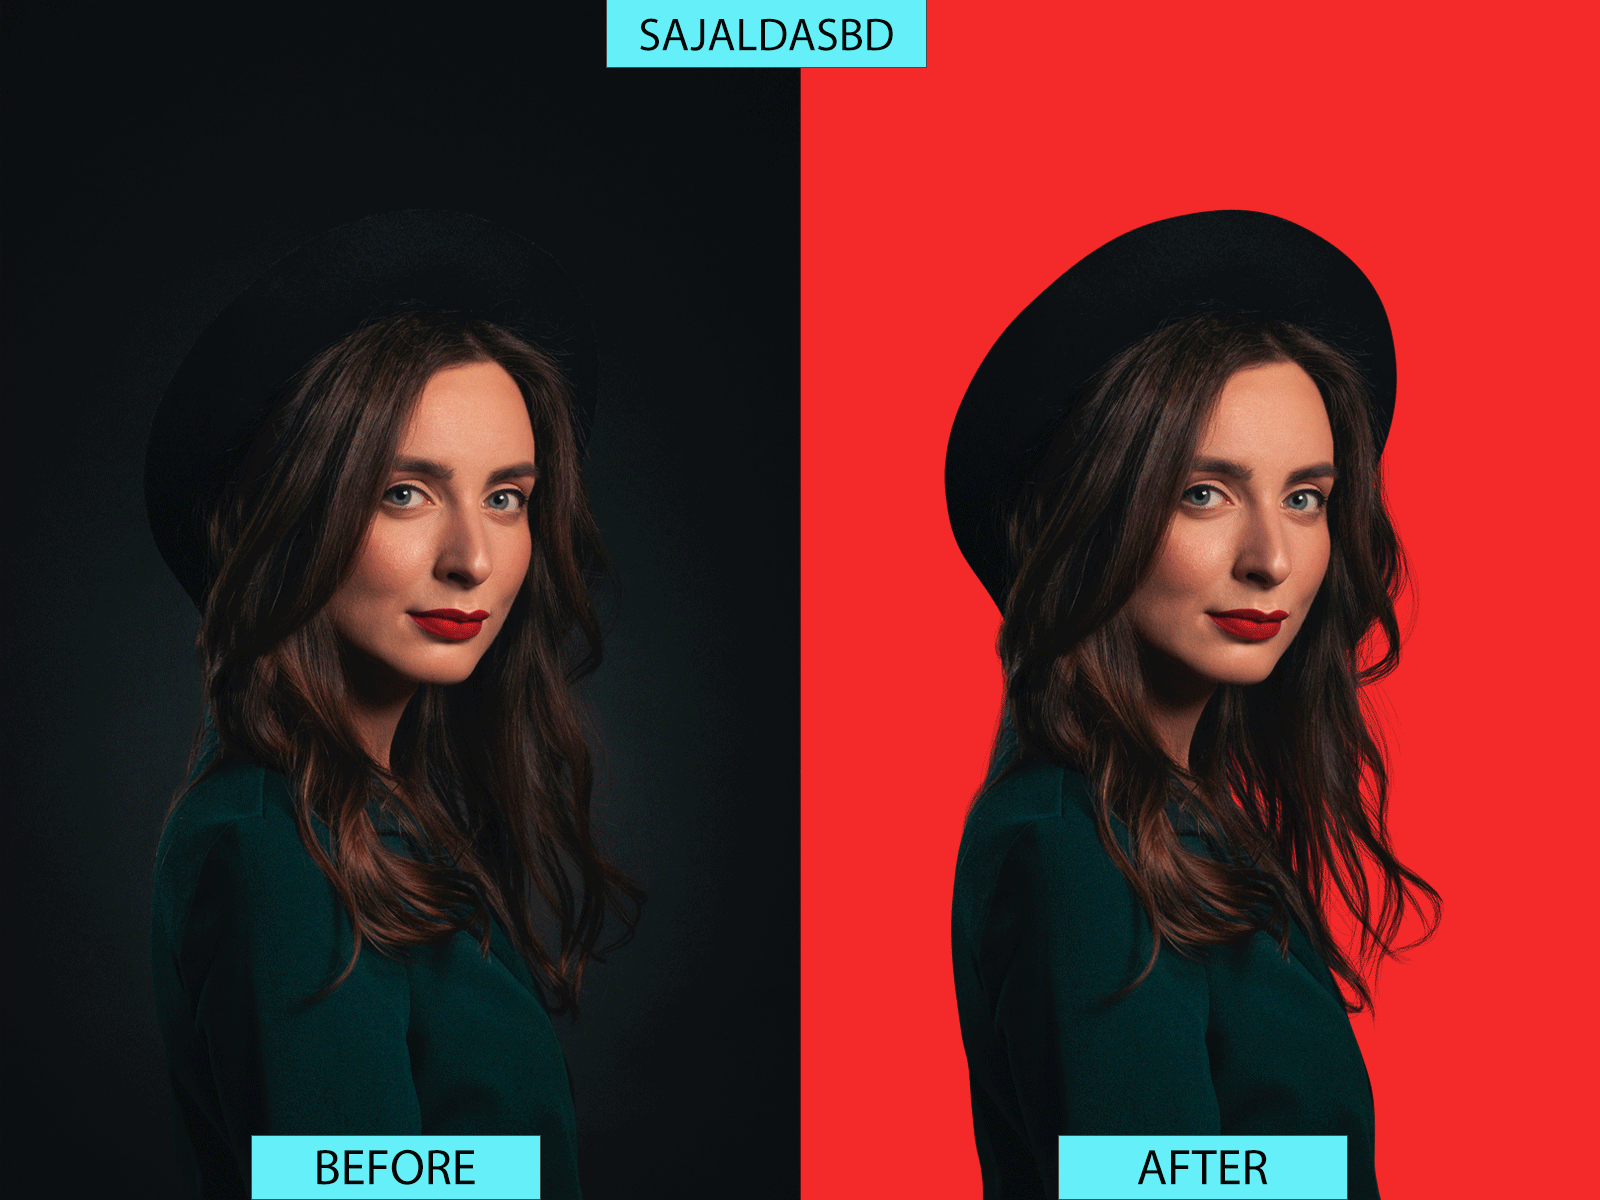 Hair Masking / Background Removal animation background removal background remove design fiverr graphic design hair masking illustration image cutout logo photoshop photoshop hair masking prefect designer remove background from image sajal sajaldas sajaldasbd top graphic designer